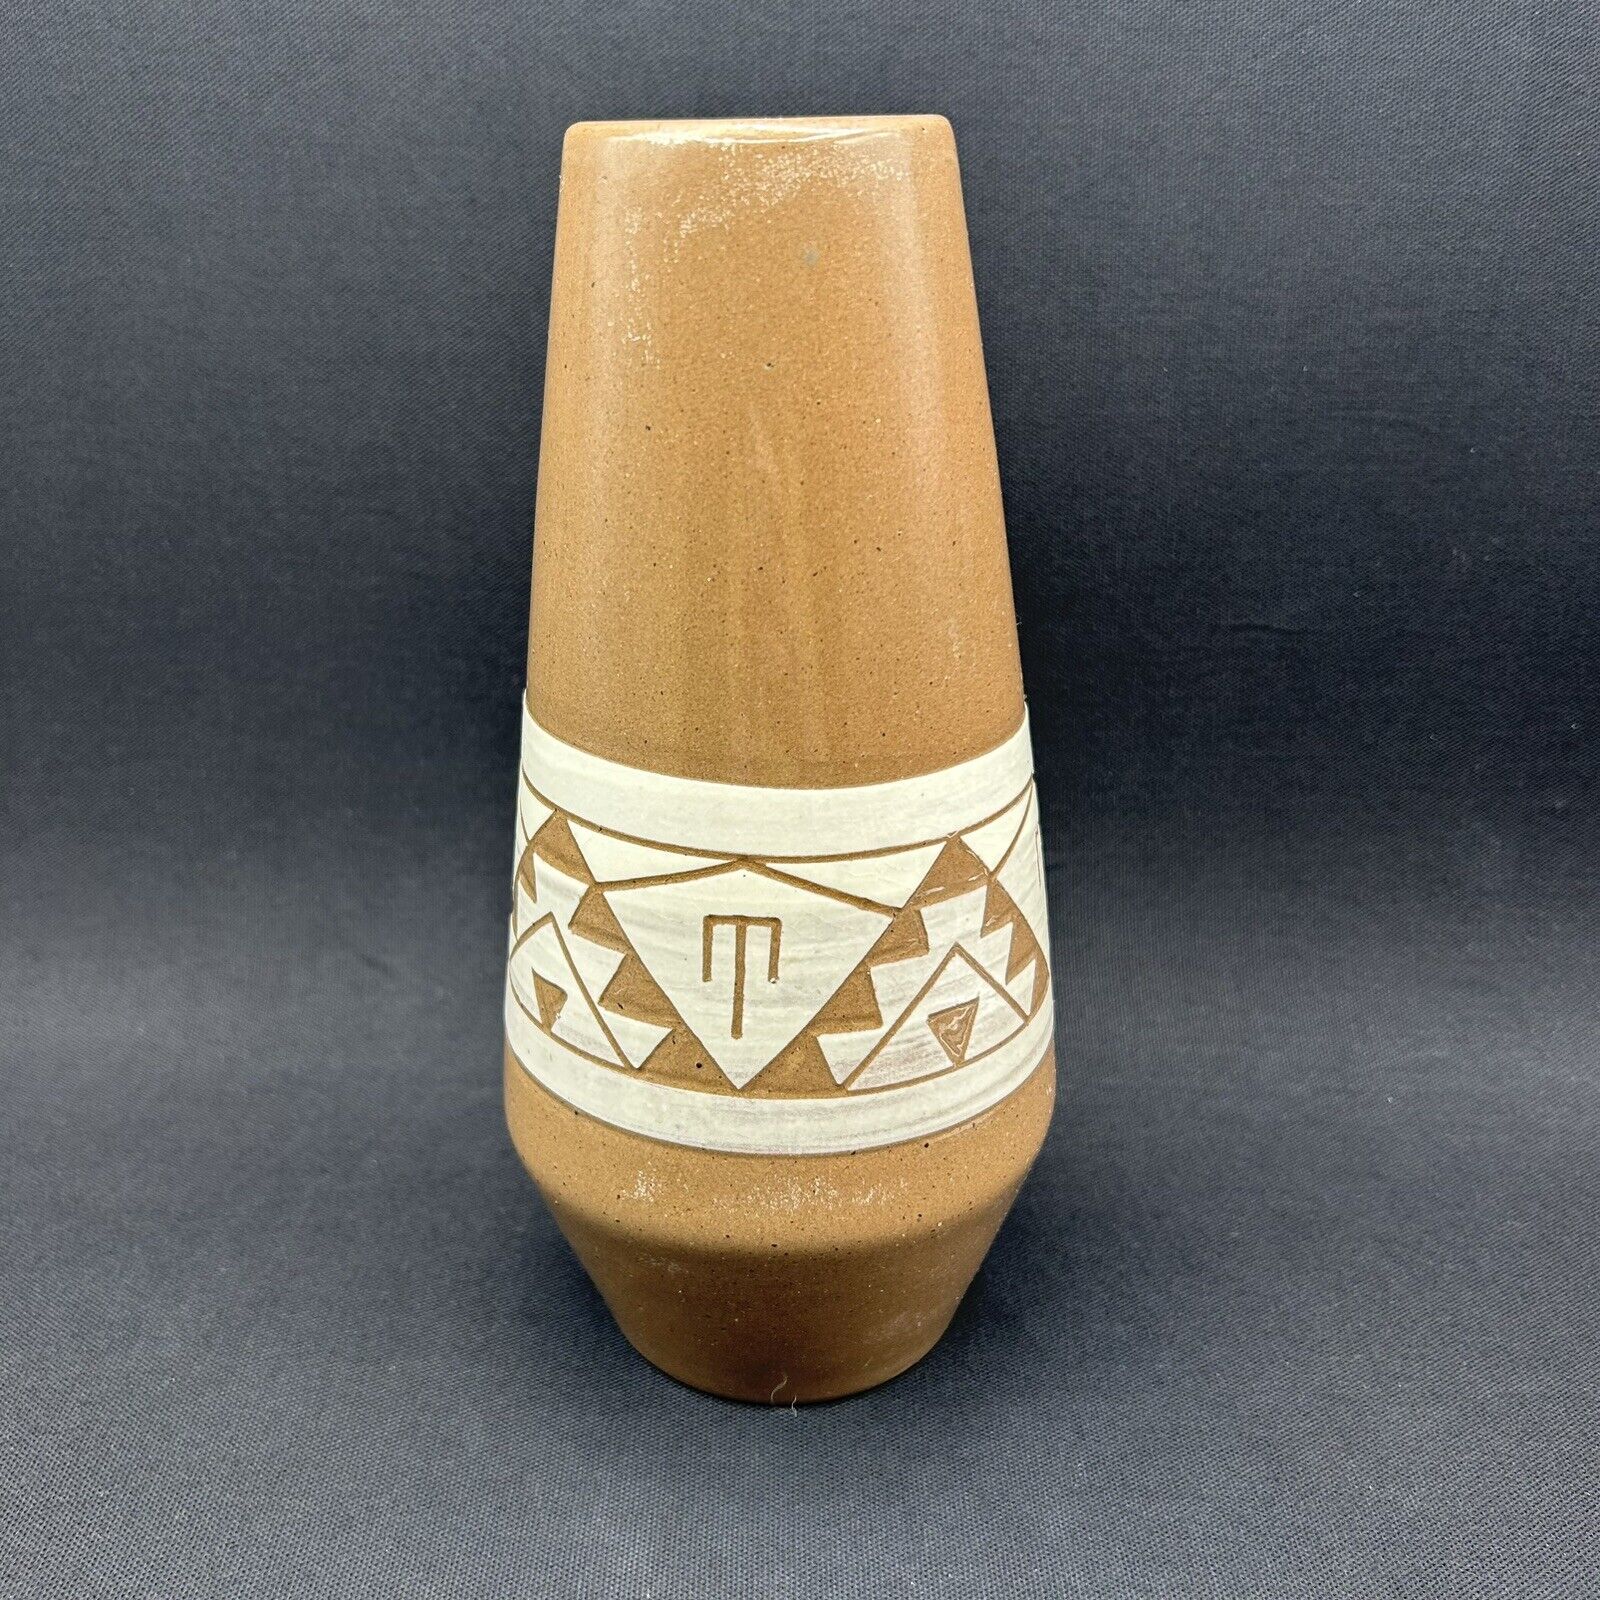 Vintage Sioux Glazed Pottery Terra Cotta Hand Carved Vase Abstract Signed 9.5”